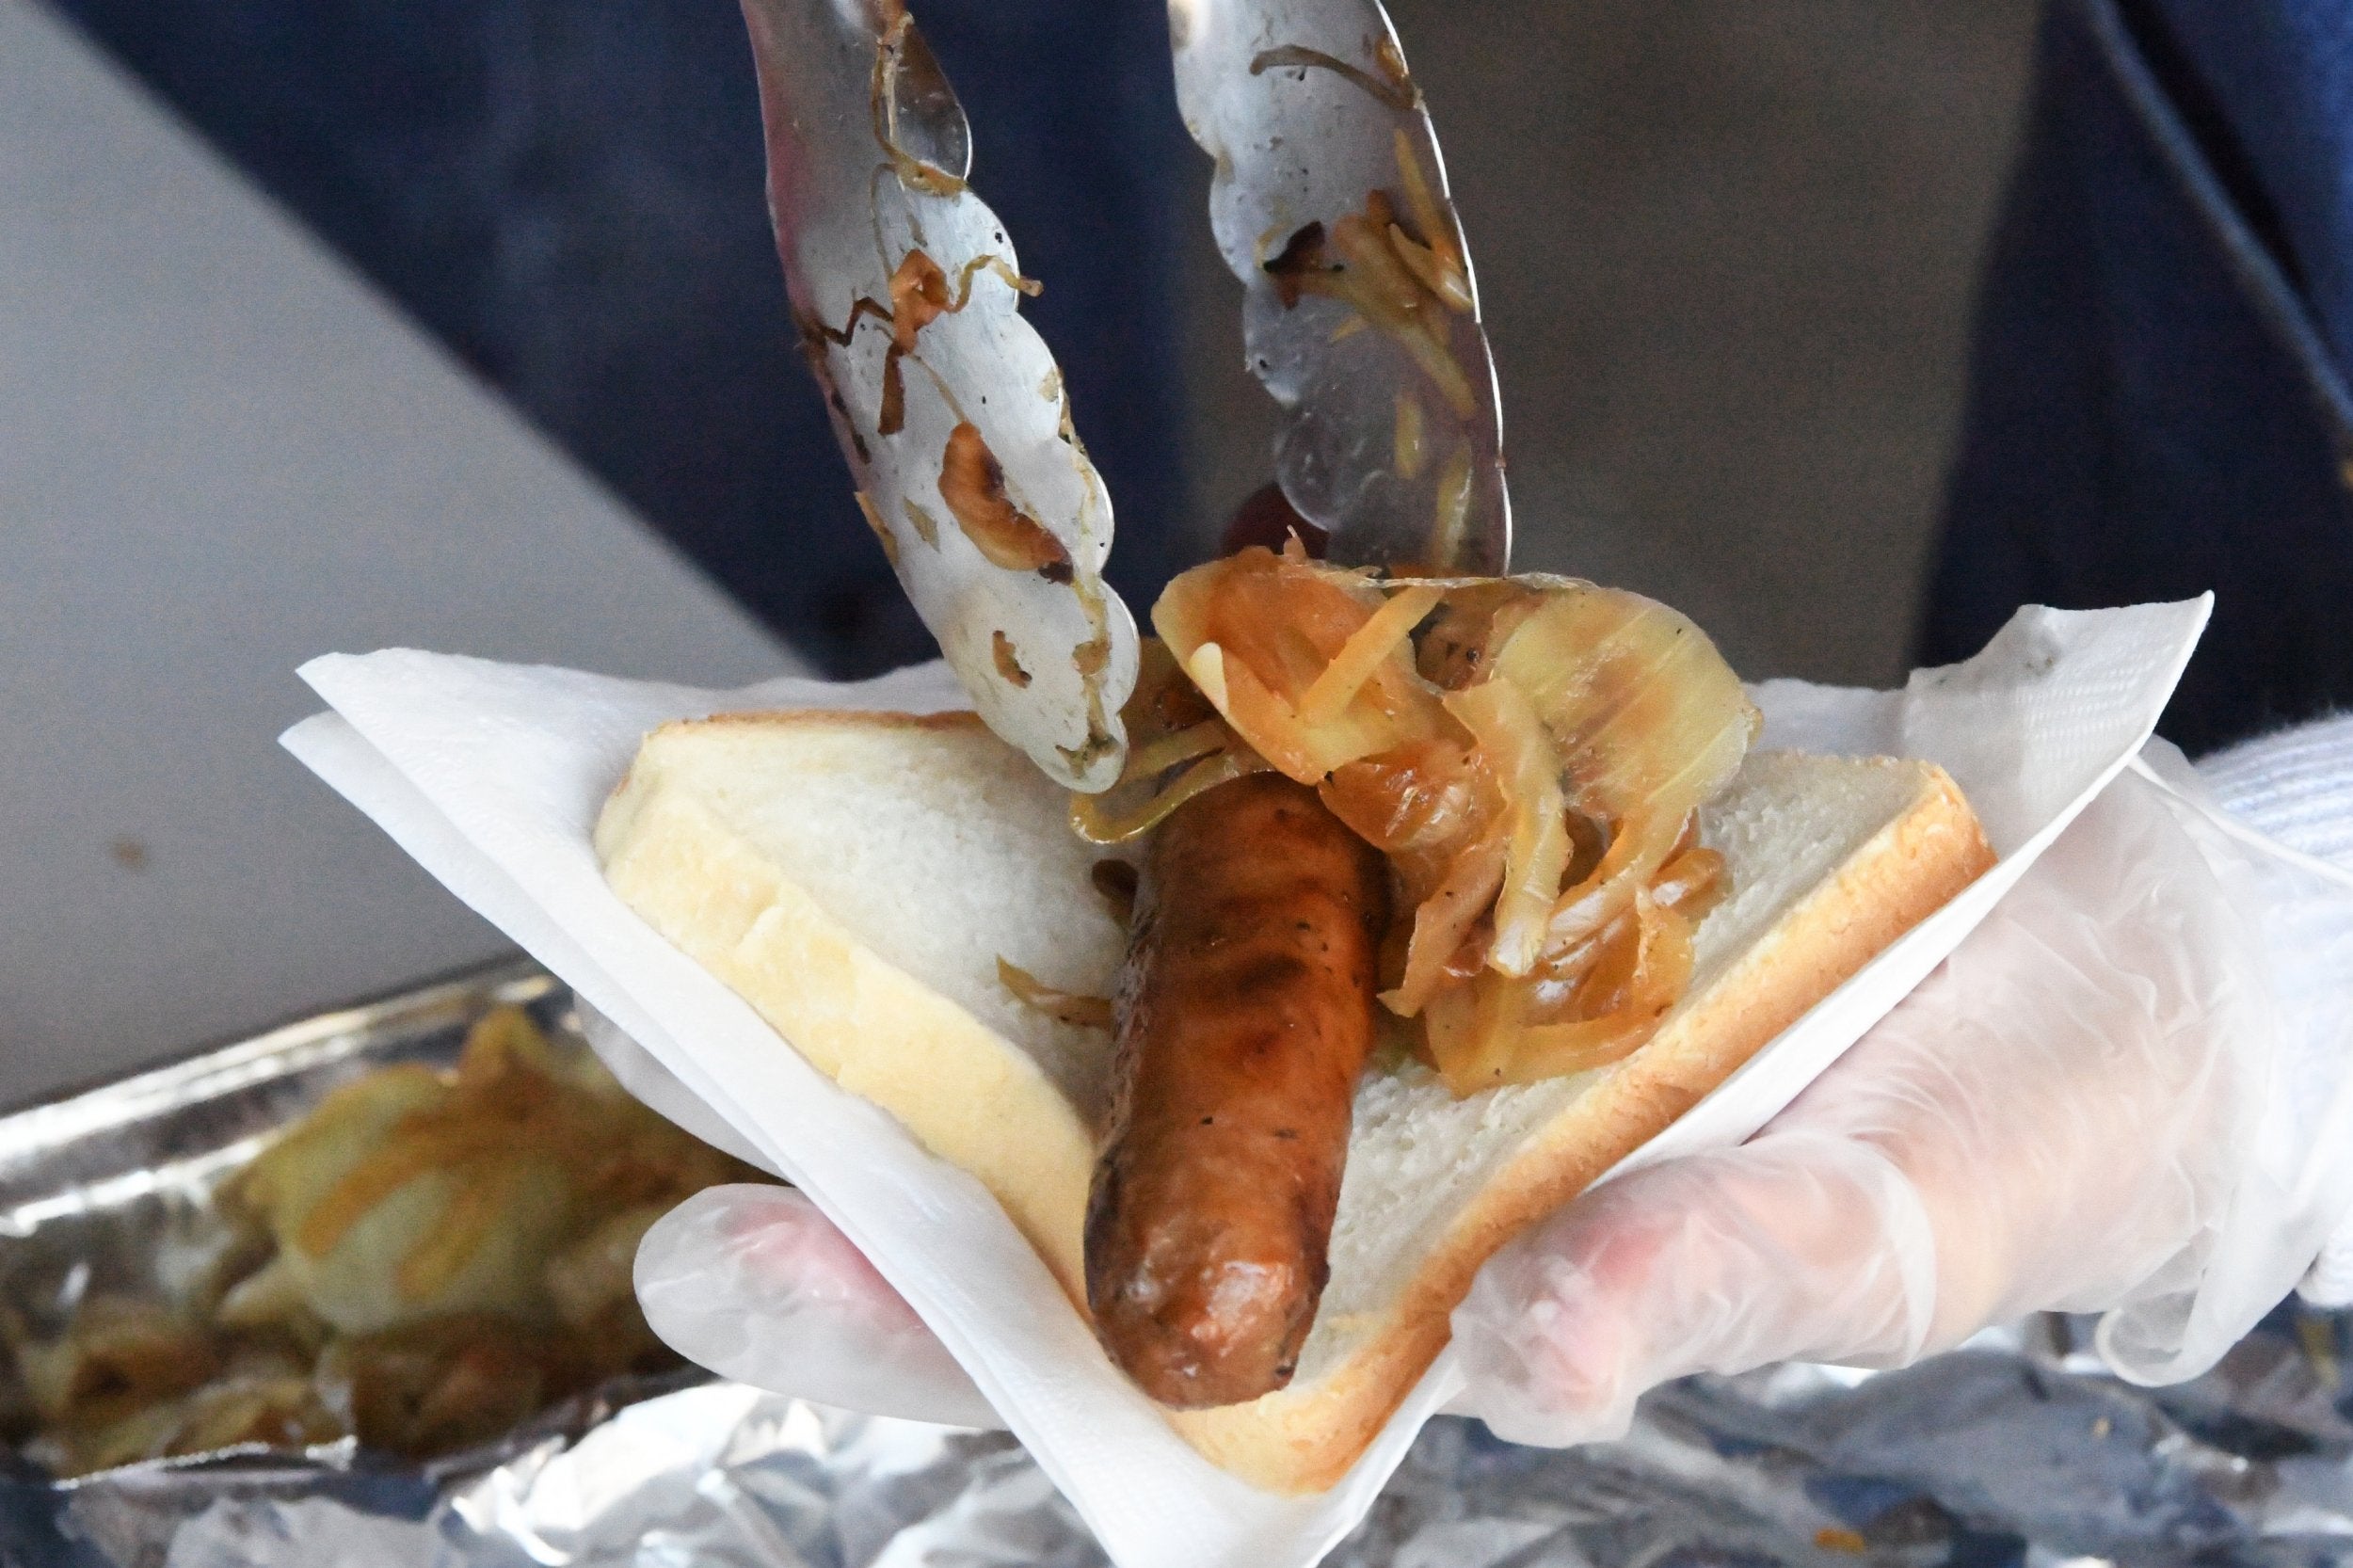 A person prepares a democracy sausage on Election Day in Melbourne, Australia, 18 May 2019.